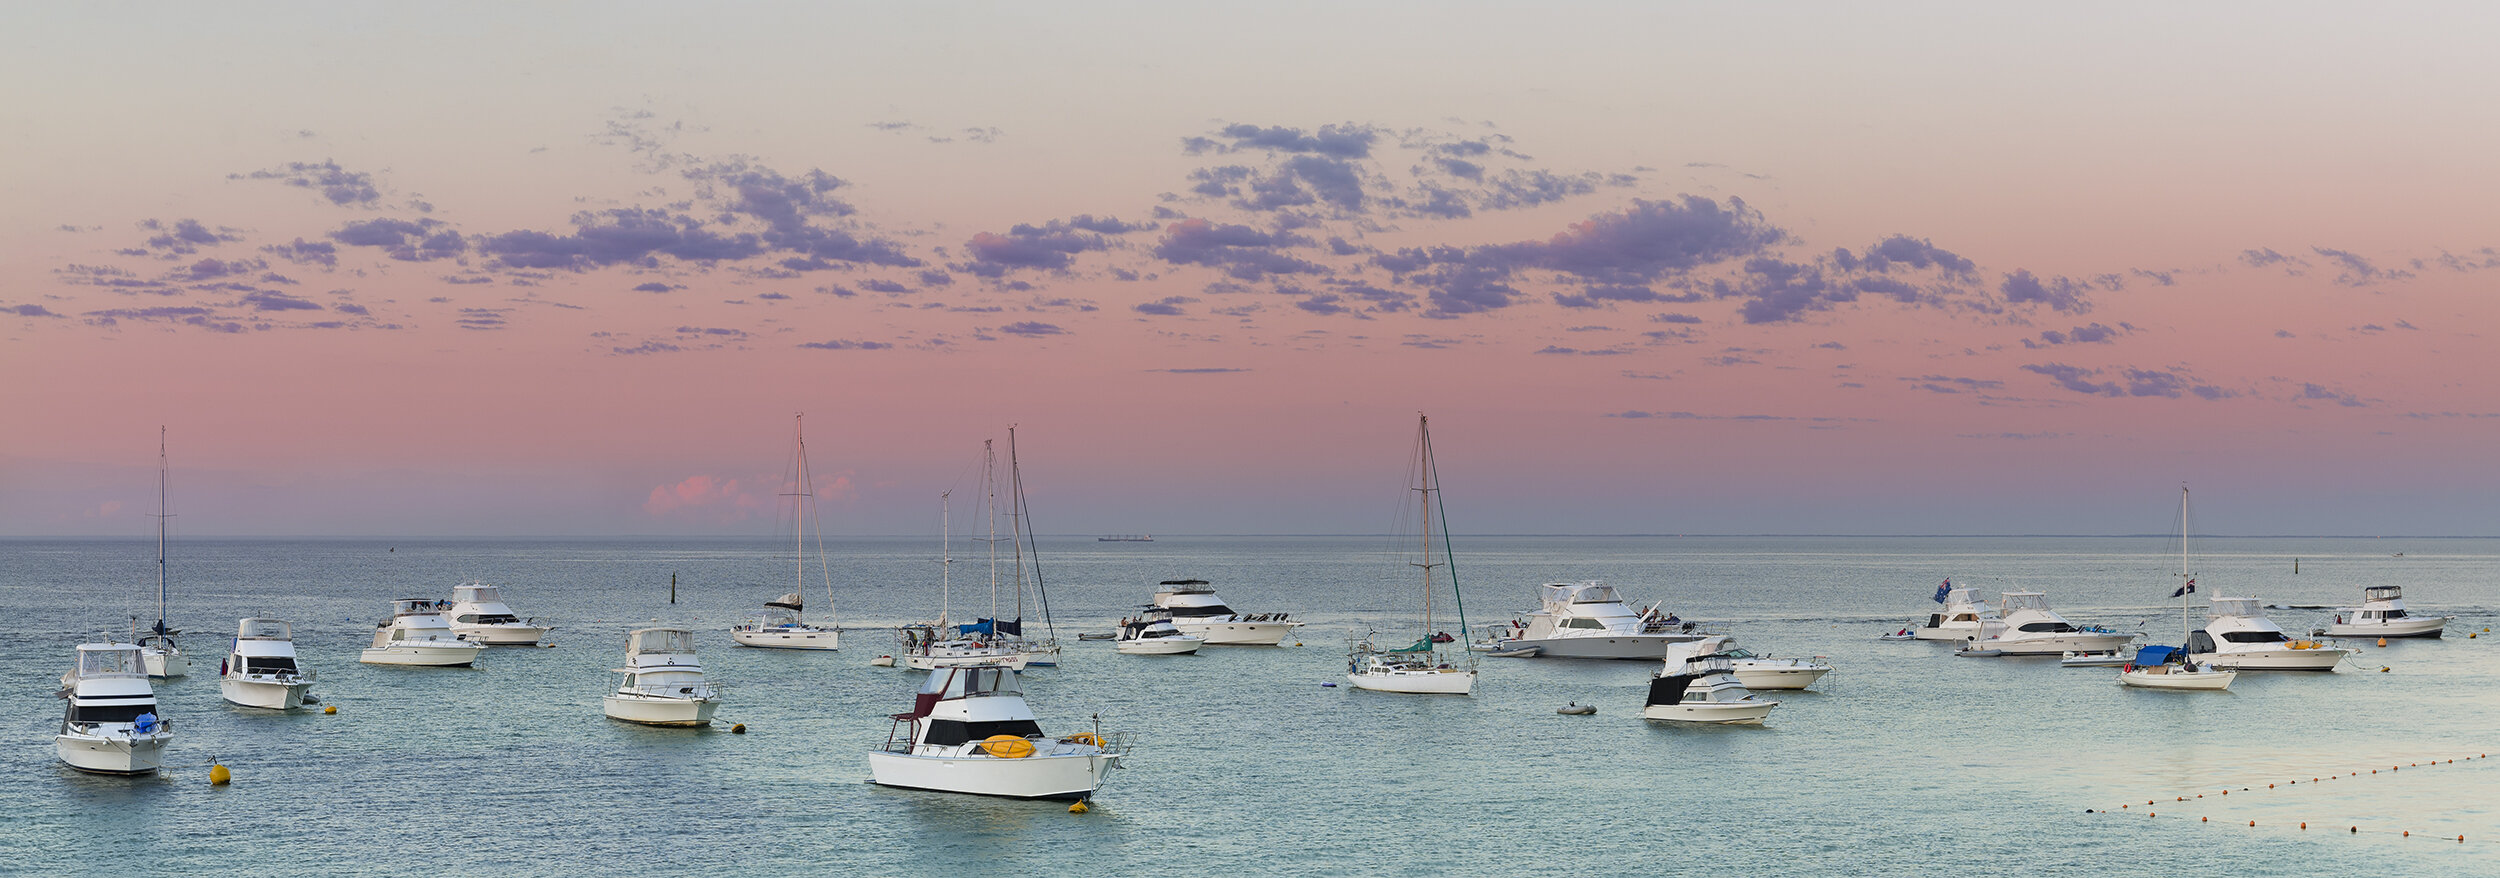 LONGREACH BAY - POST SUNSET HUES from $255 AUD